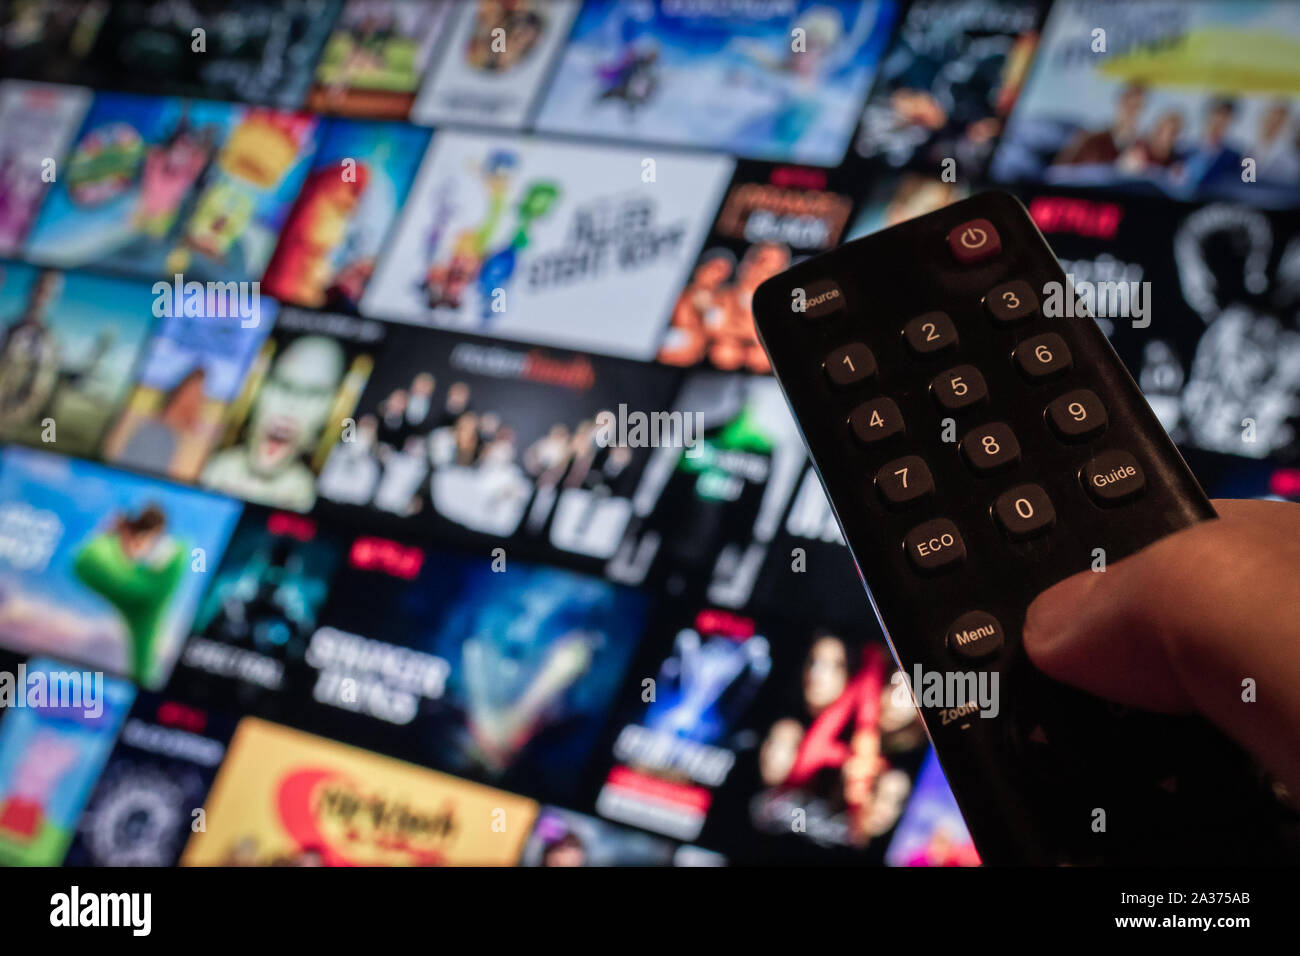 Multimedia Television video streaming, Media TV on demand, web banner background Stock Photo